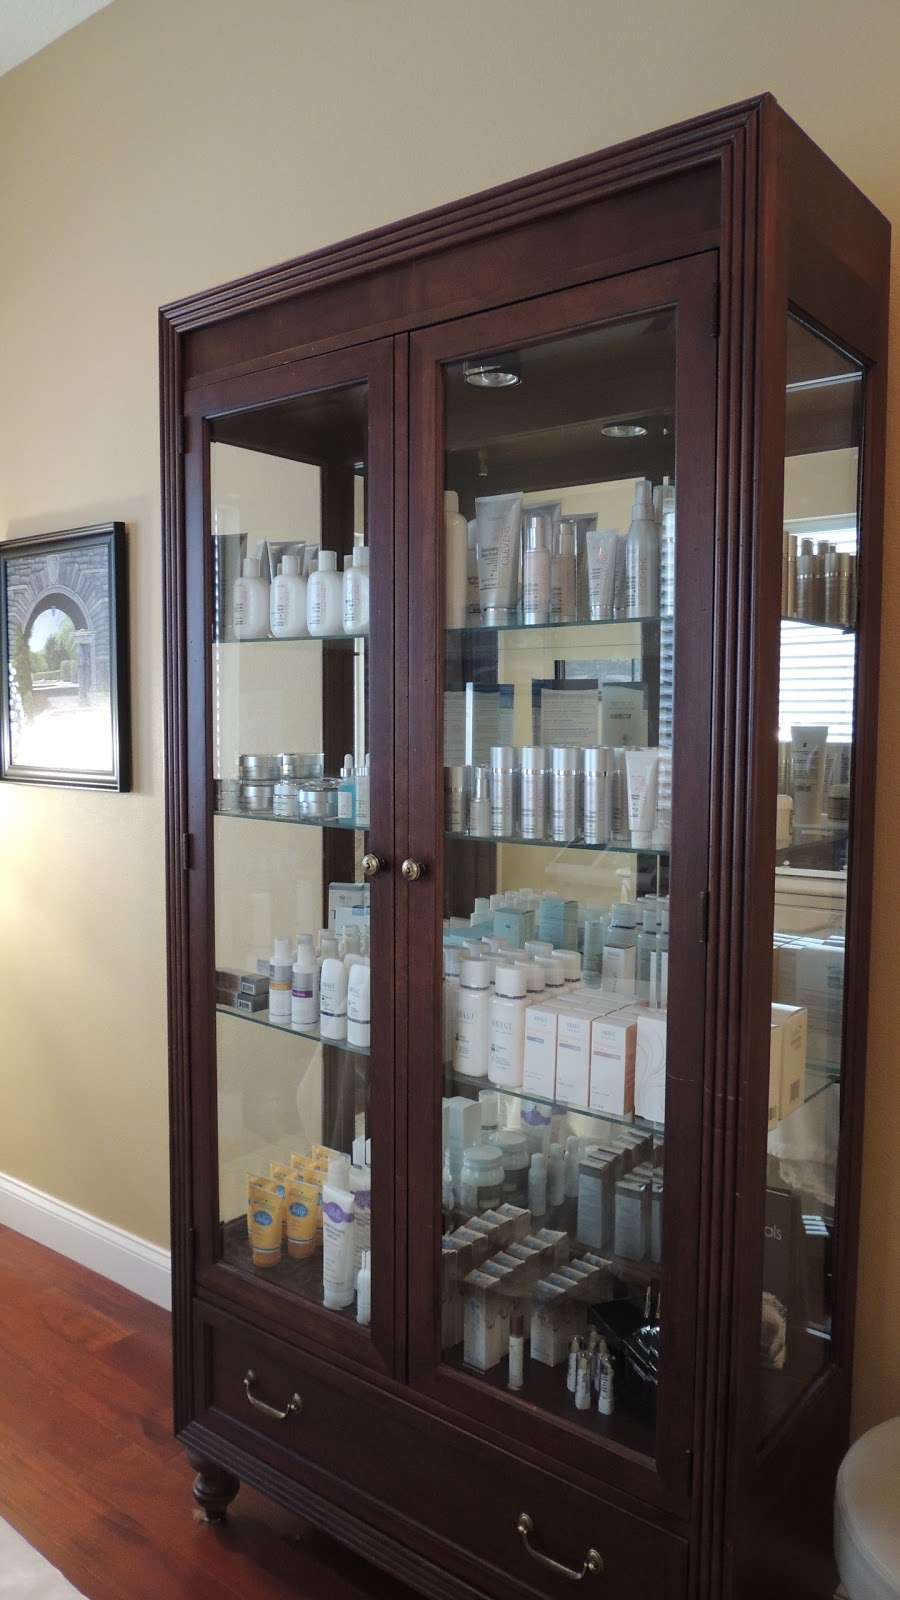 Clevens Face and Body Specialists | 135 N Grove St, Merritt Island, FL 32953, USA | Phone: (321) 727-3223